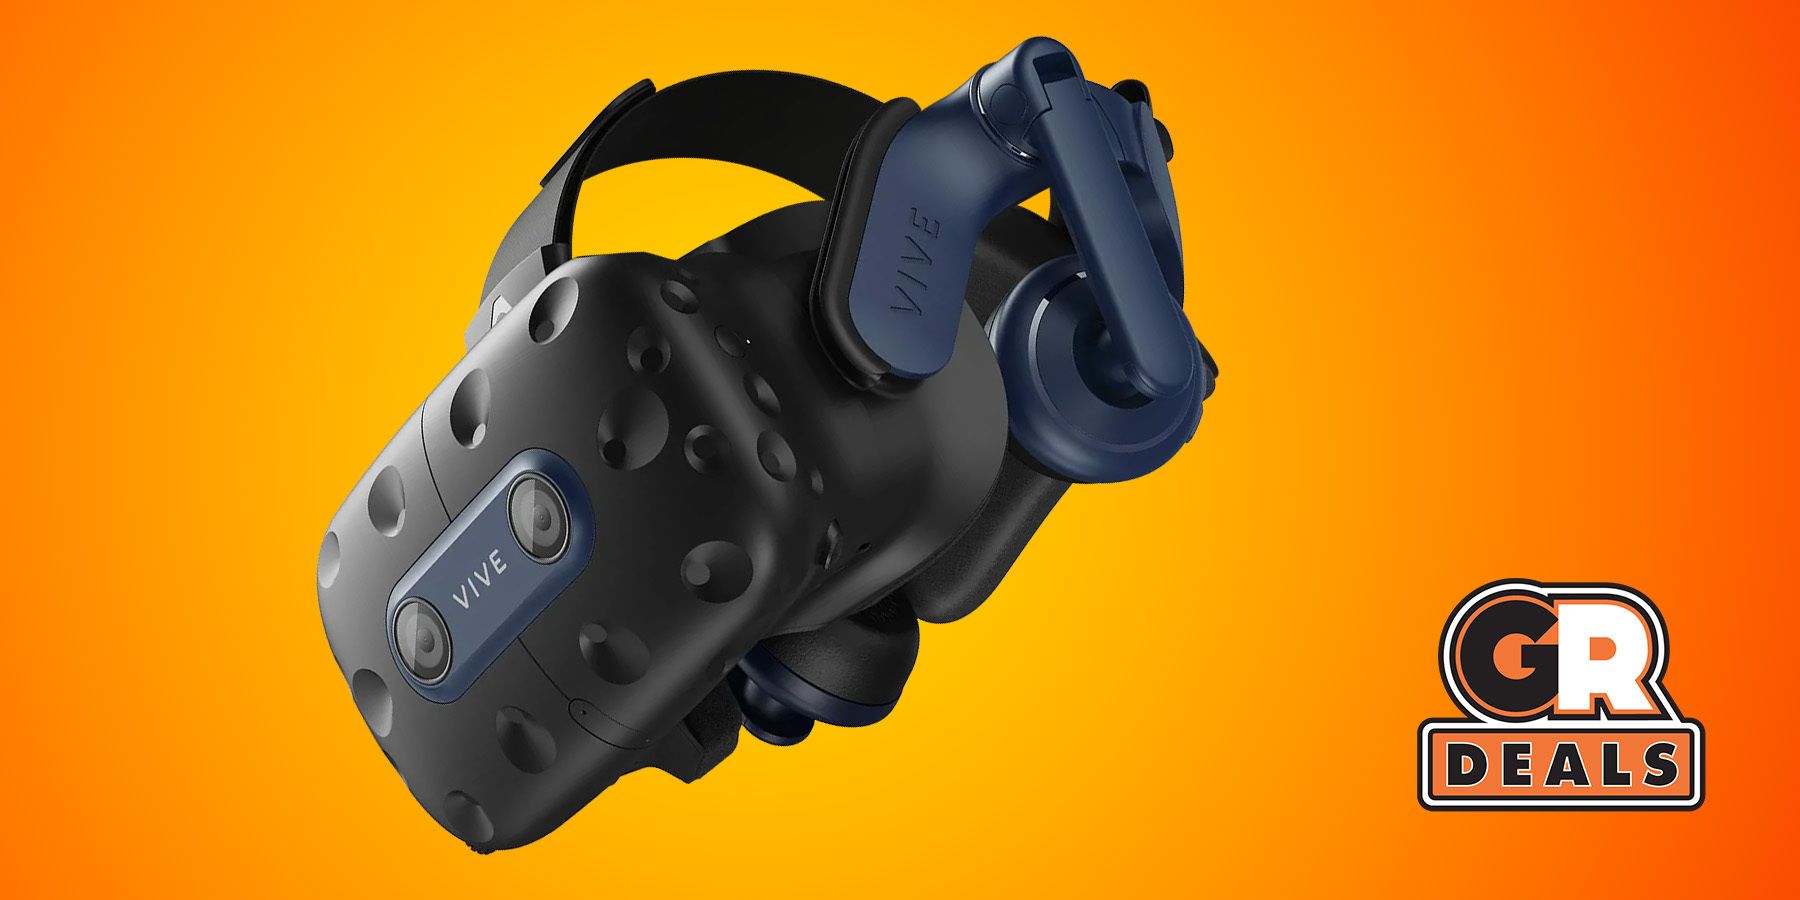 The Best Deal of the Year Saves 0 on HTC Vive VR Headset